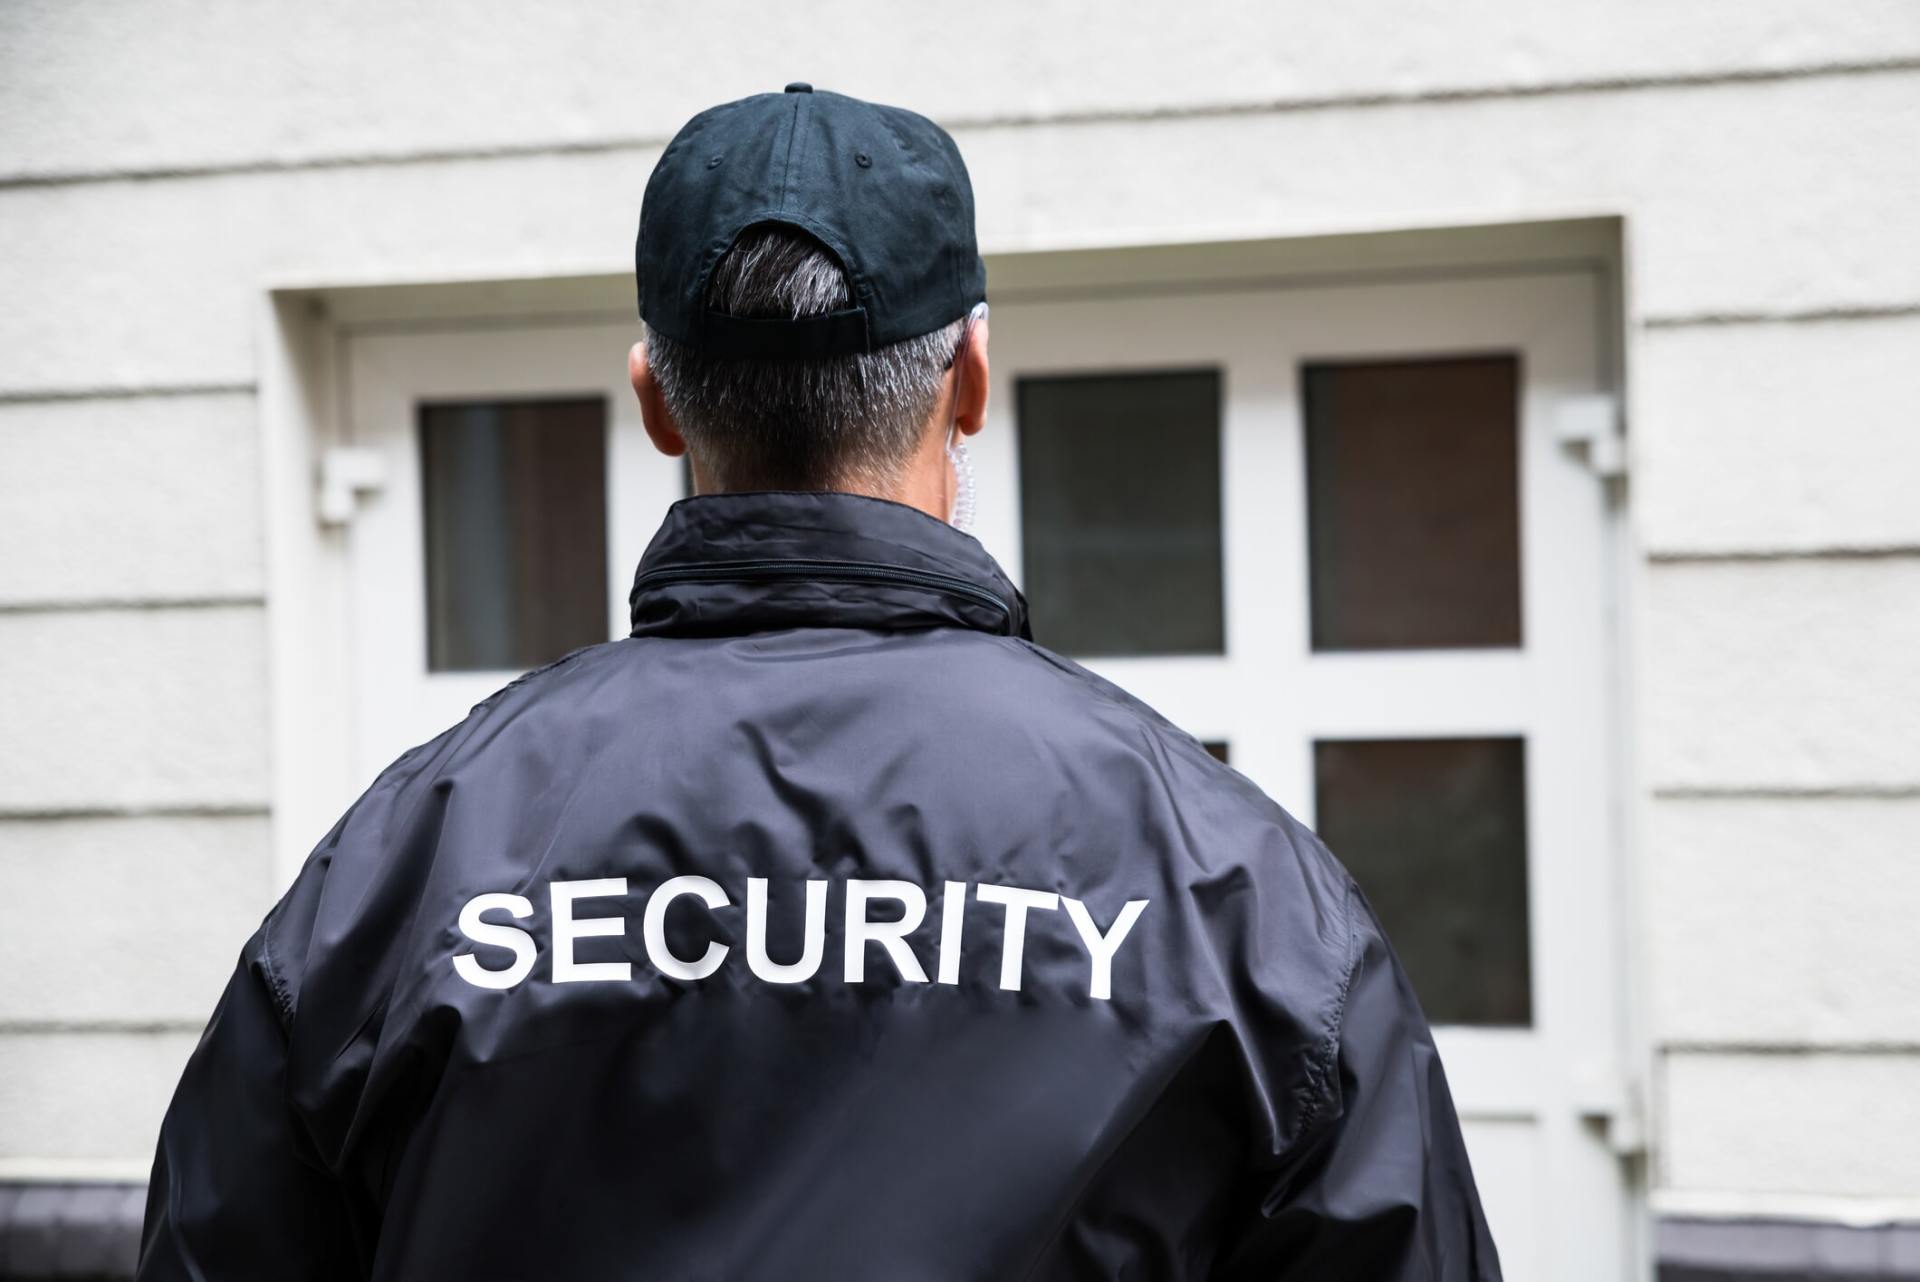 Quality Security Services — Sercurity in Black Shades and Cap in Little Rock, AR